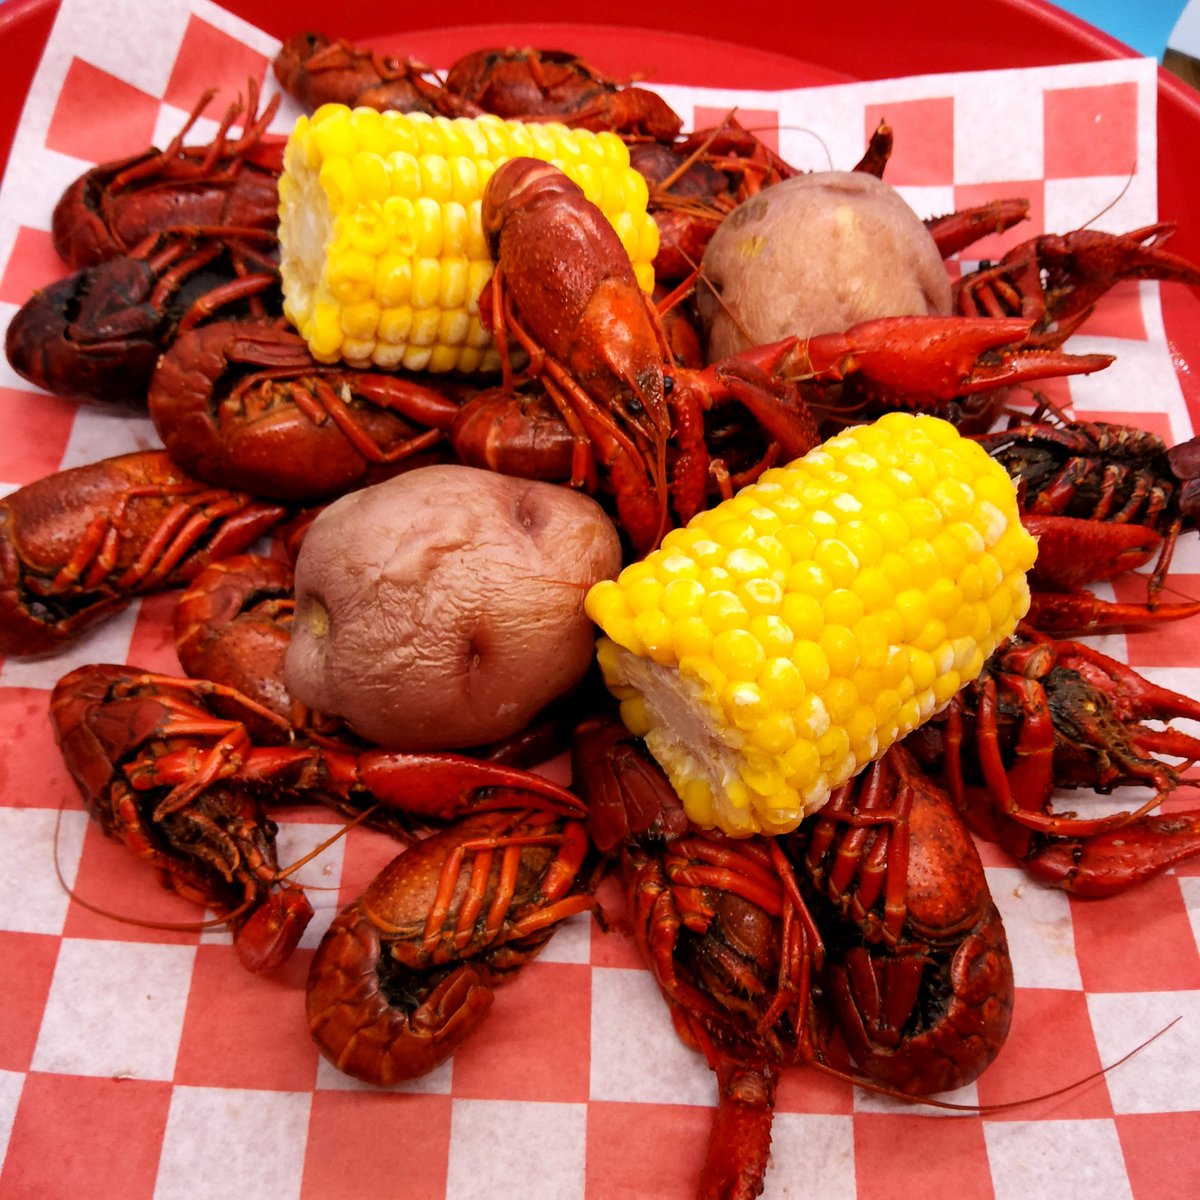 #YummyliciousChef🐻 #FoodPhotography 
Home dining Crawfish Boil